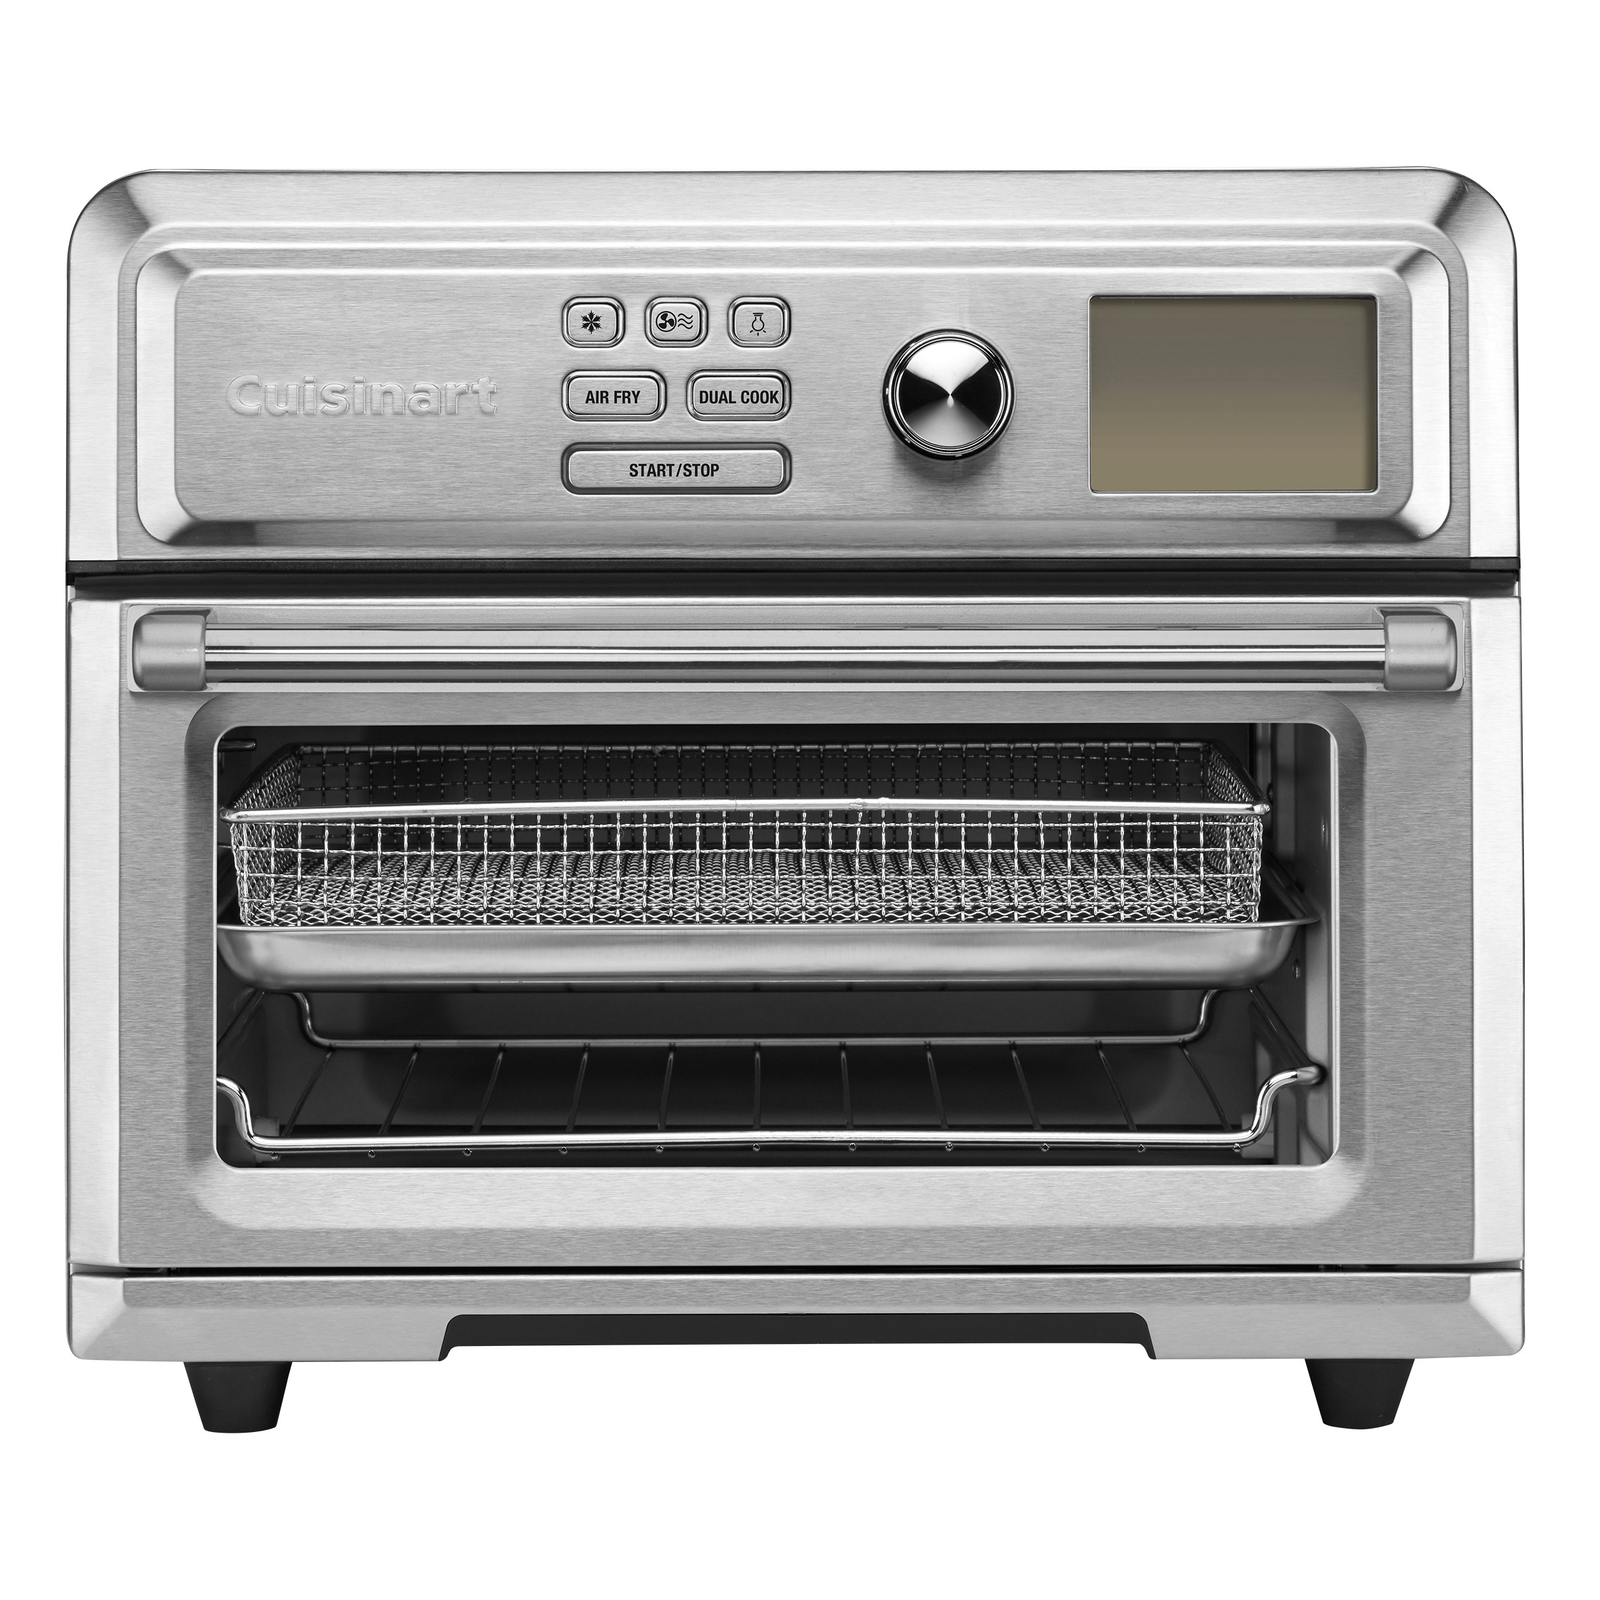 Cuisinart CTOA-130PC1FR Digital Airfryer Toaster Oven - Certified Refurbished